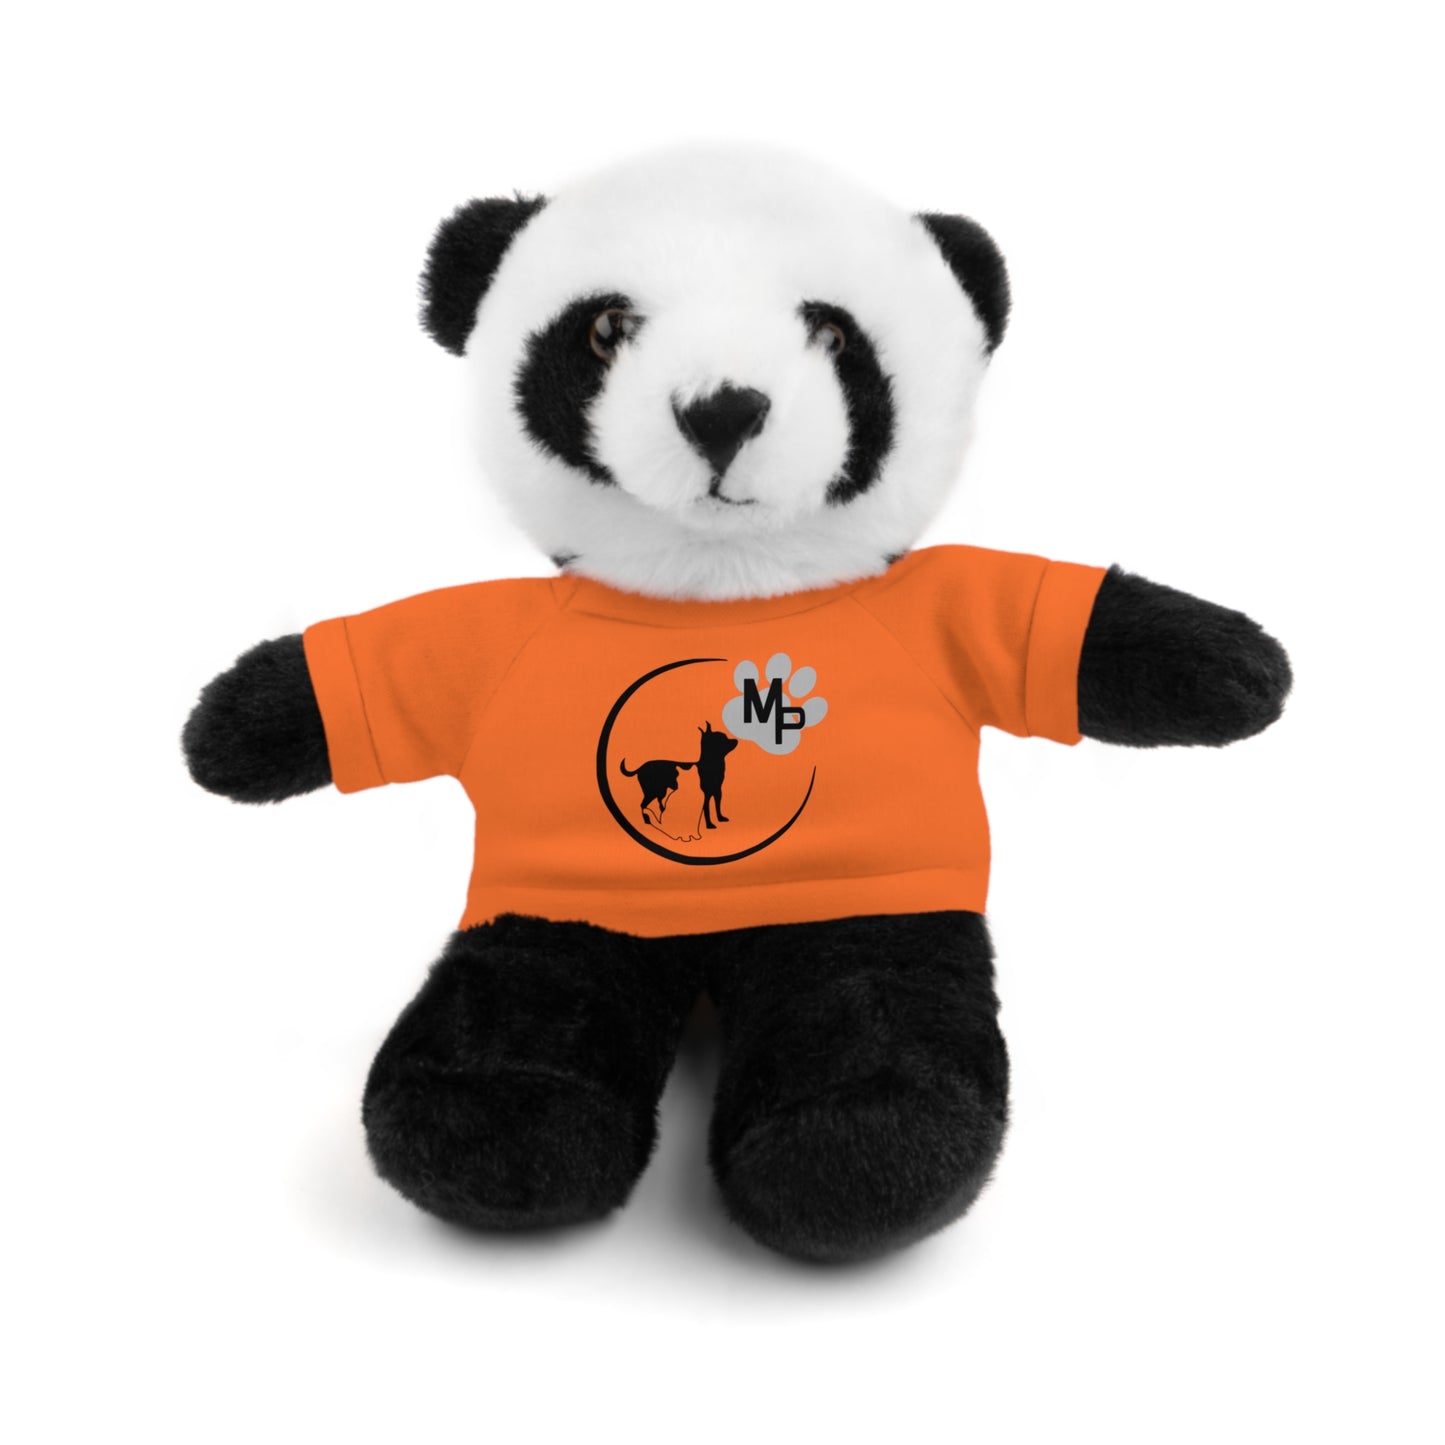 Monkey's Pack Stuffed Animals with Tee (multiple animals and colors to choose from)